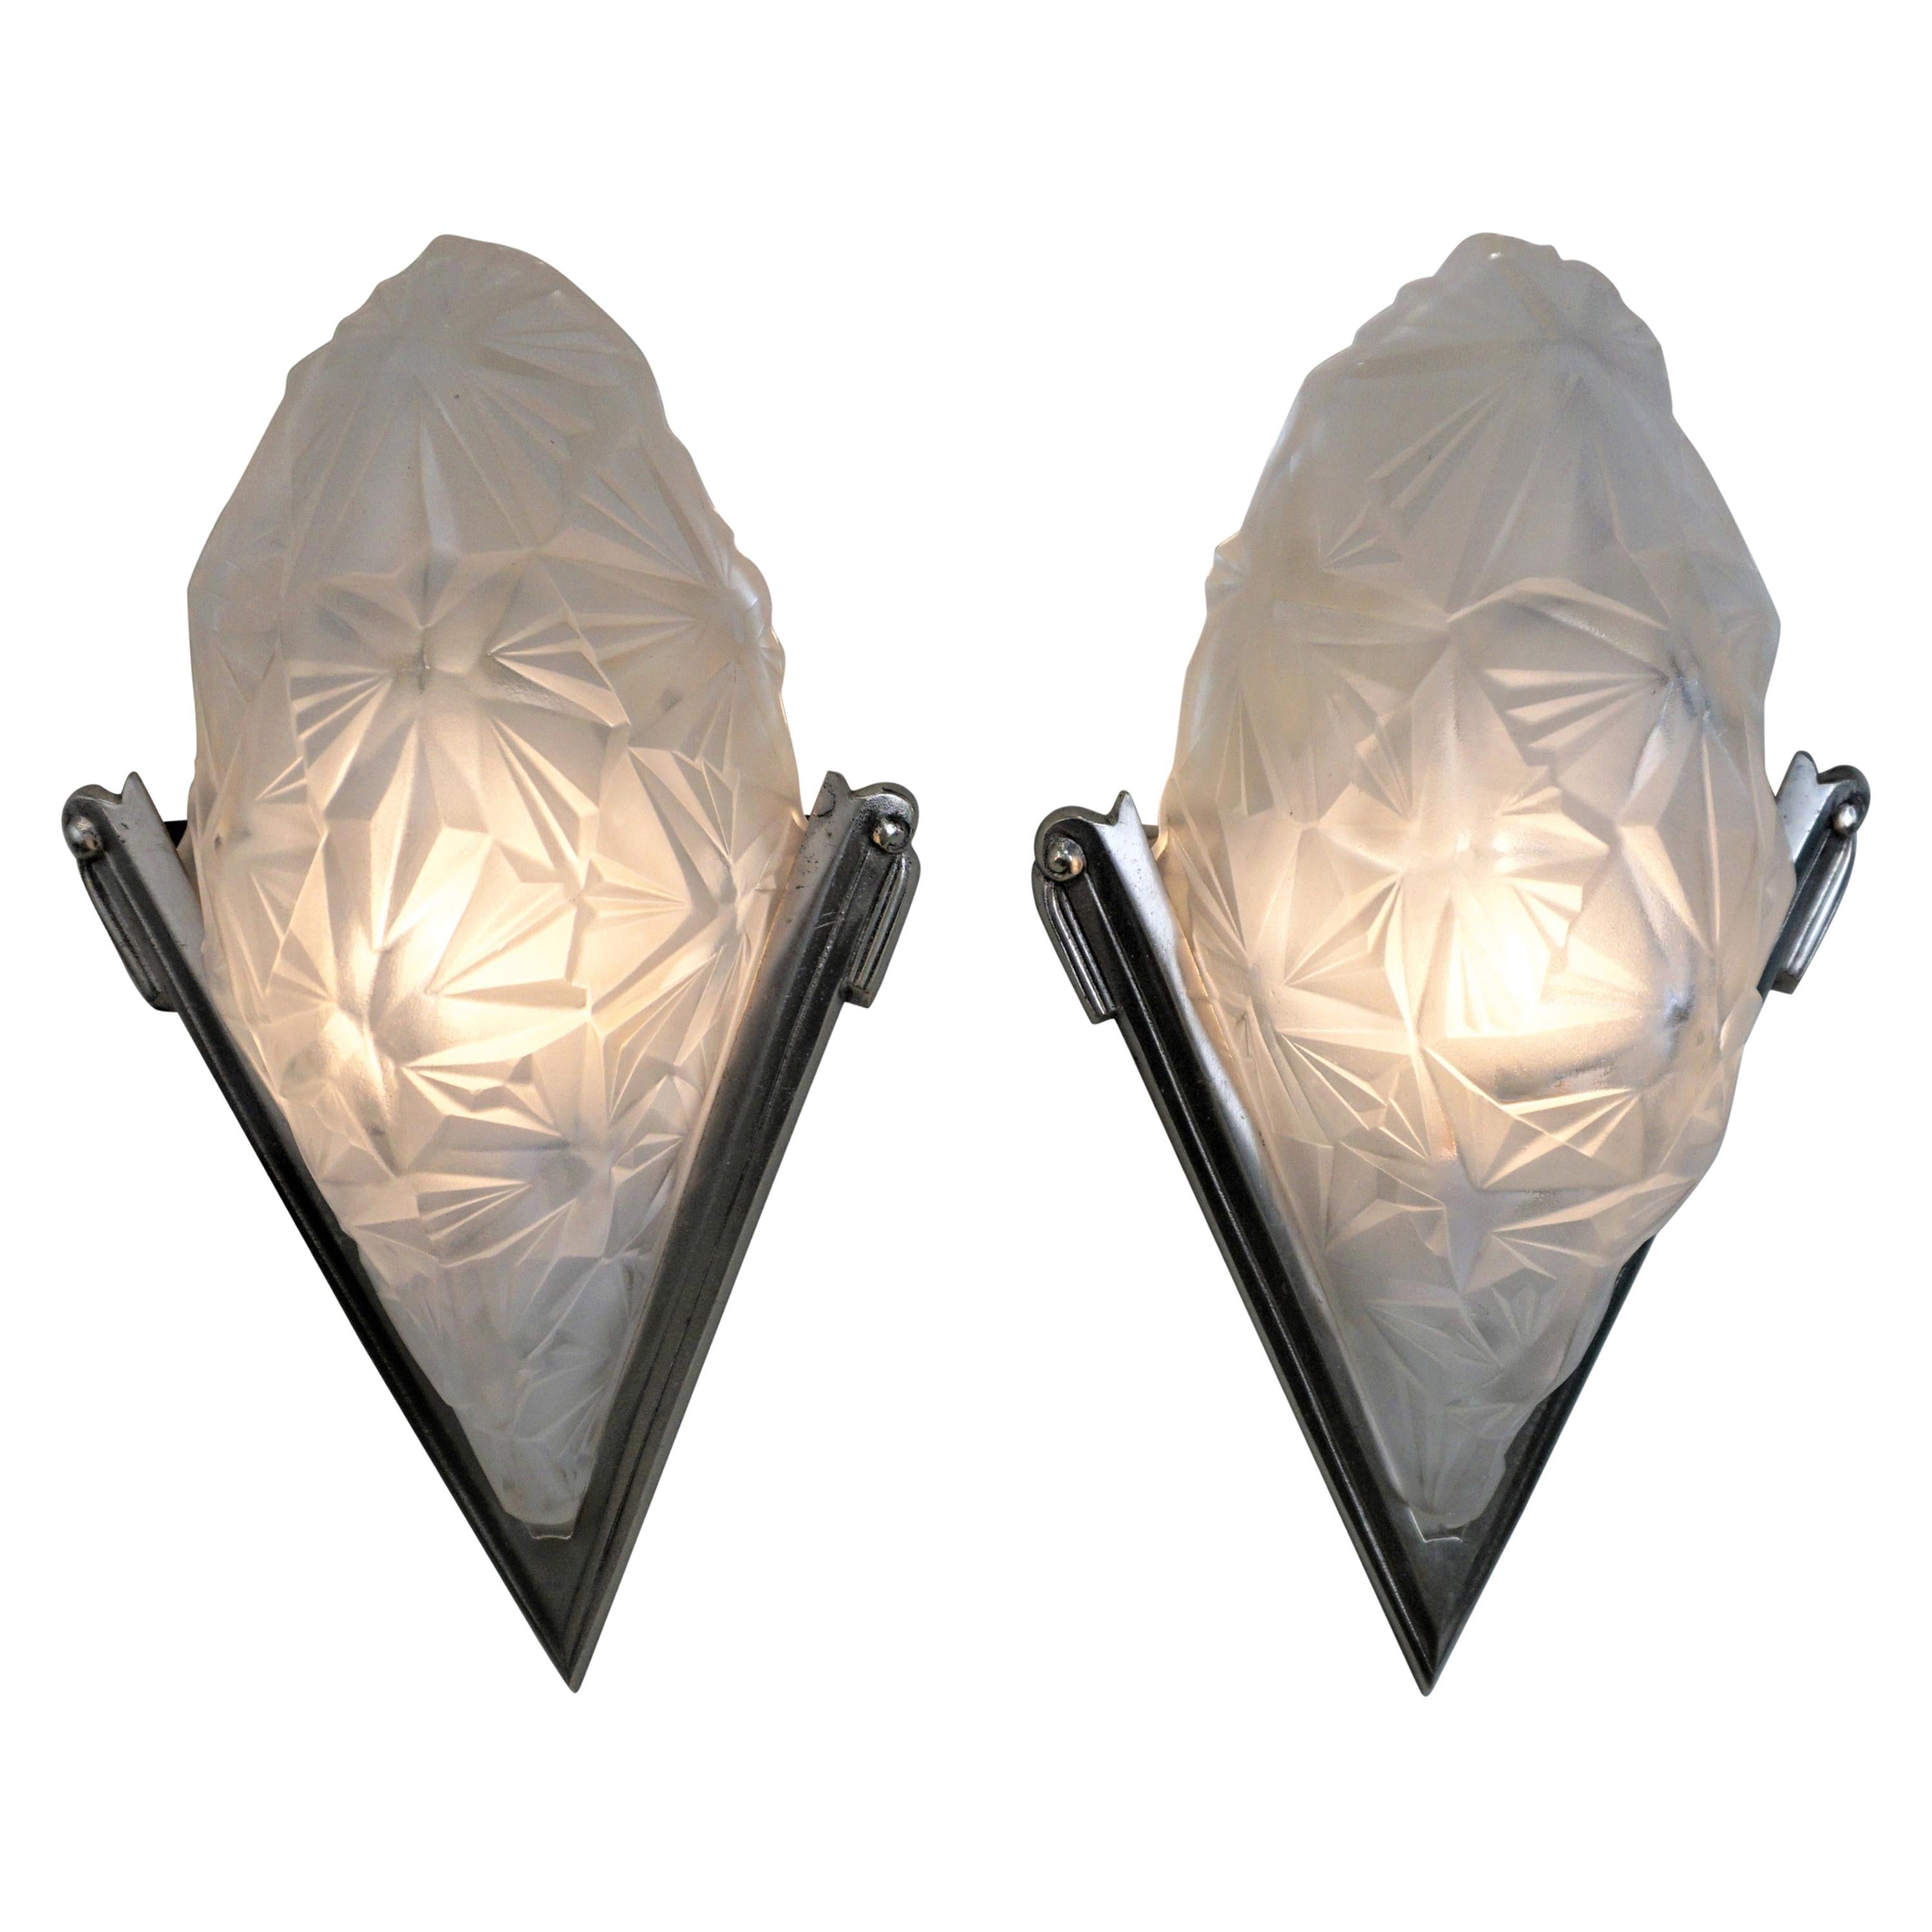 Pair of French Art Deco Wall Sconces Signed by Degué